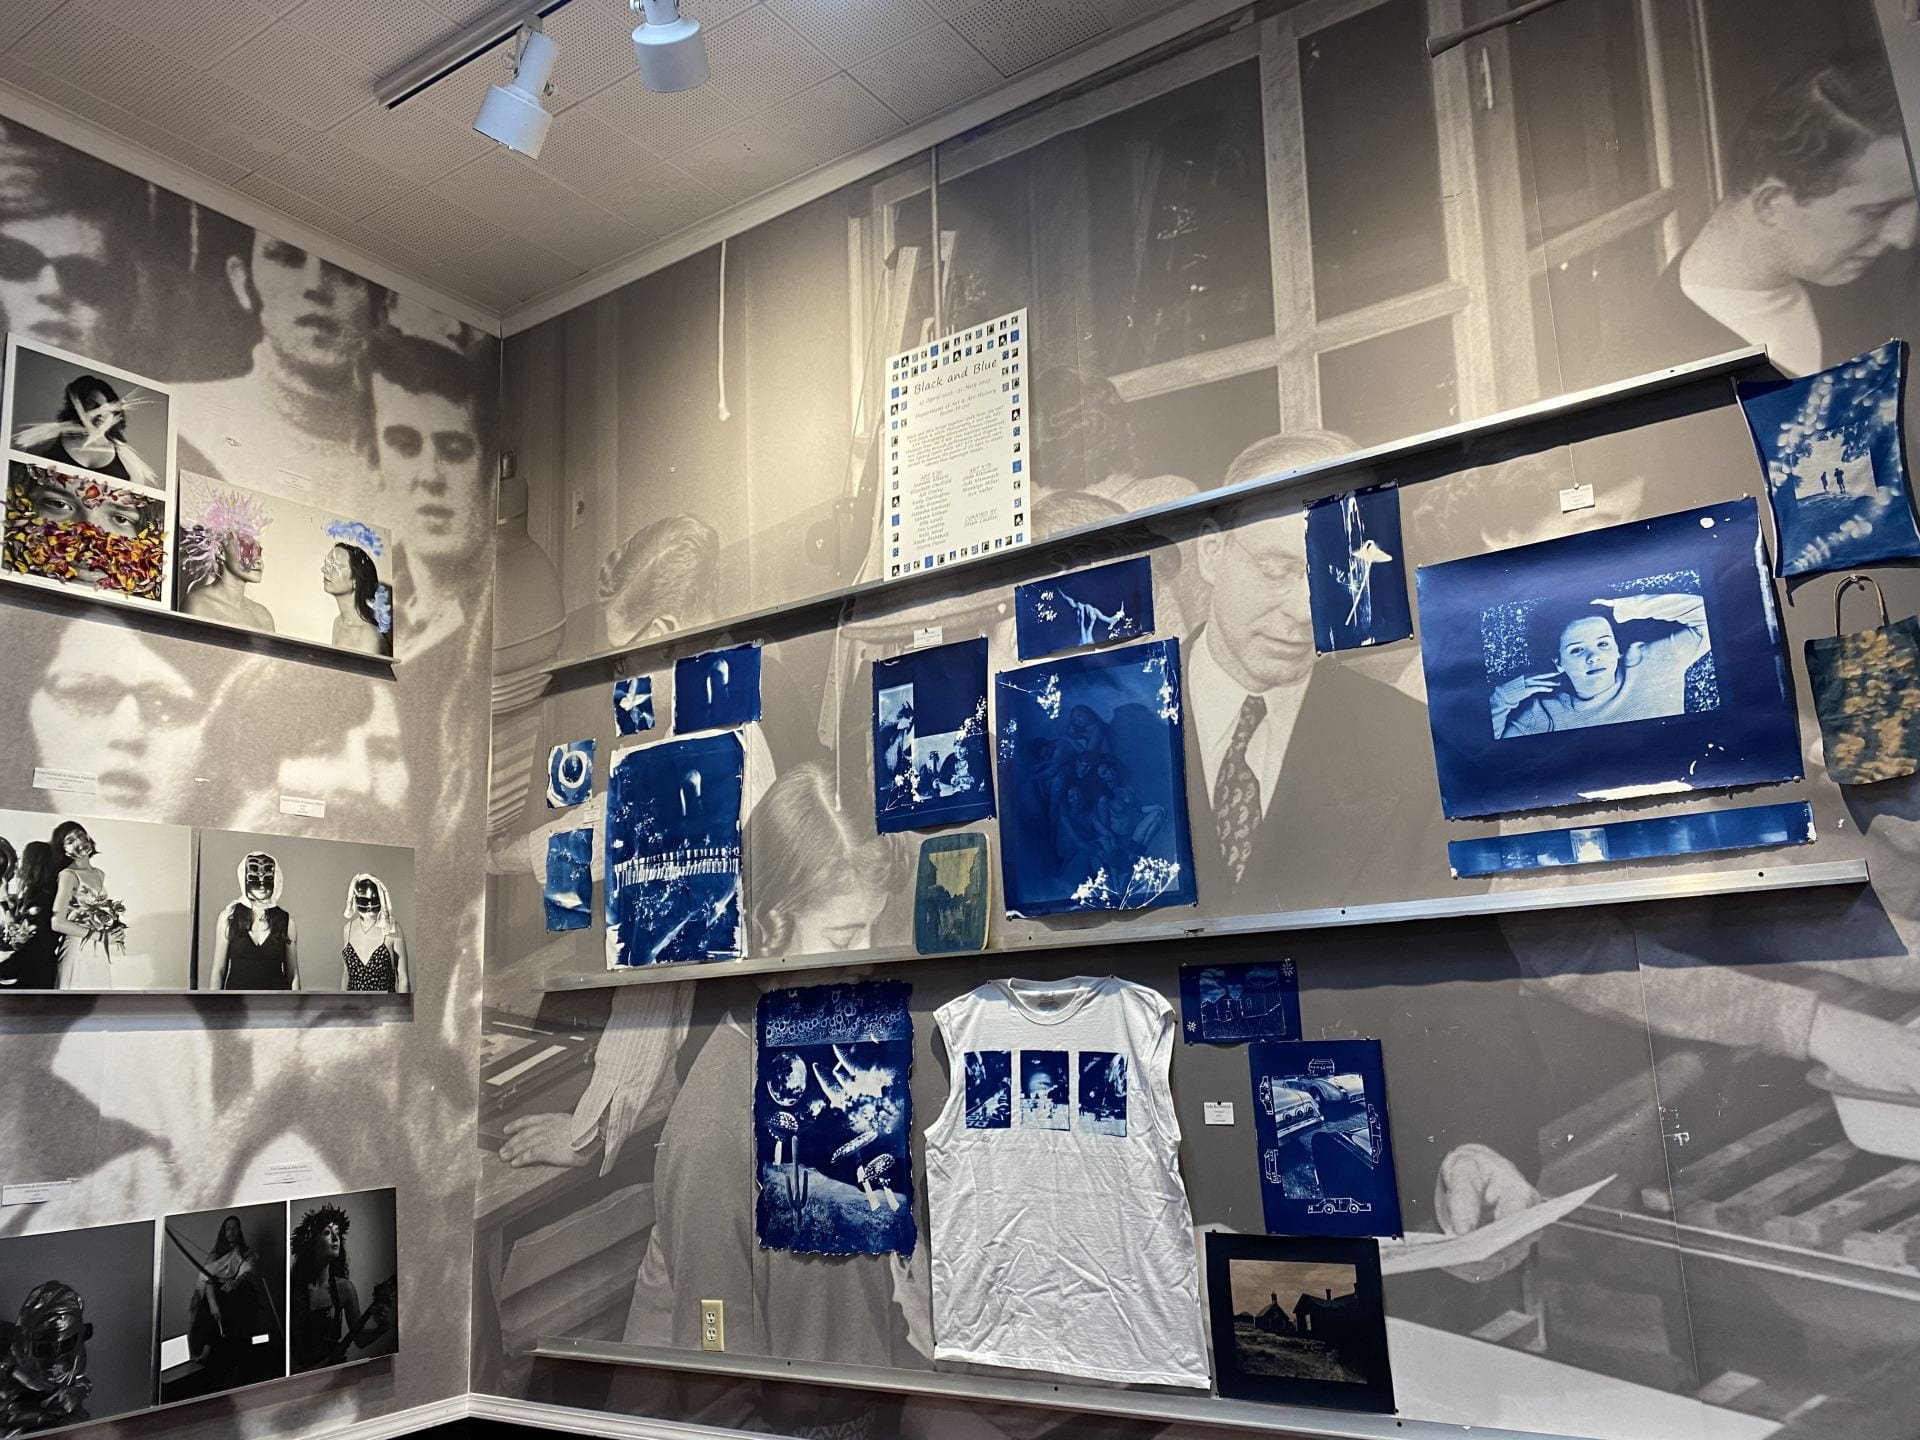 Several cyanotype pieces on display including a large white t-shirt and some black and white photo prints